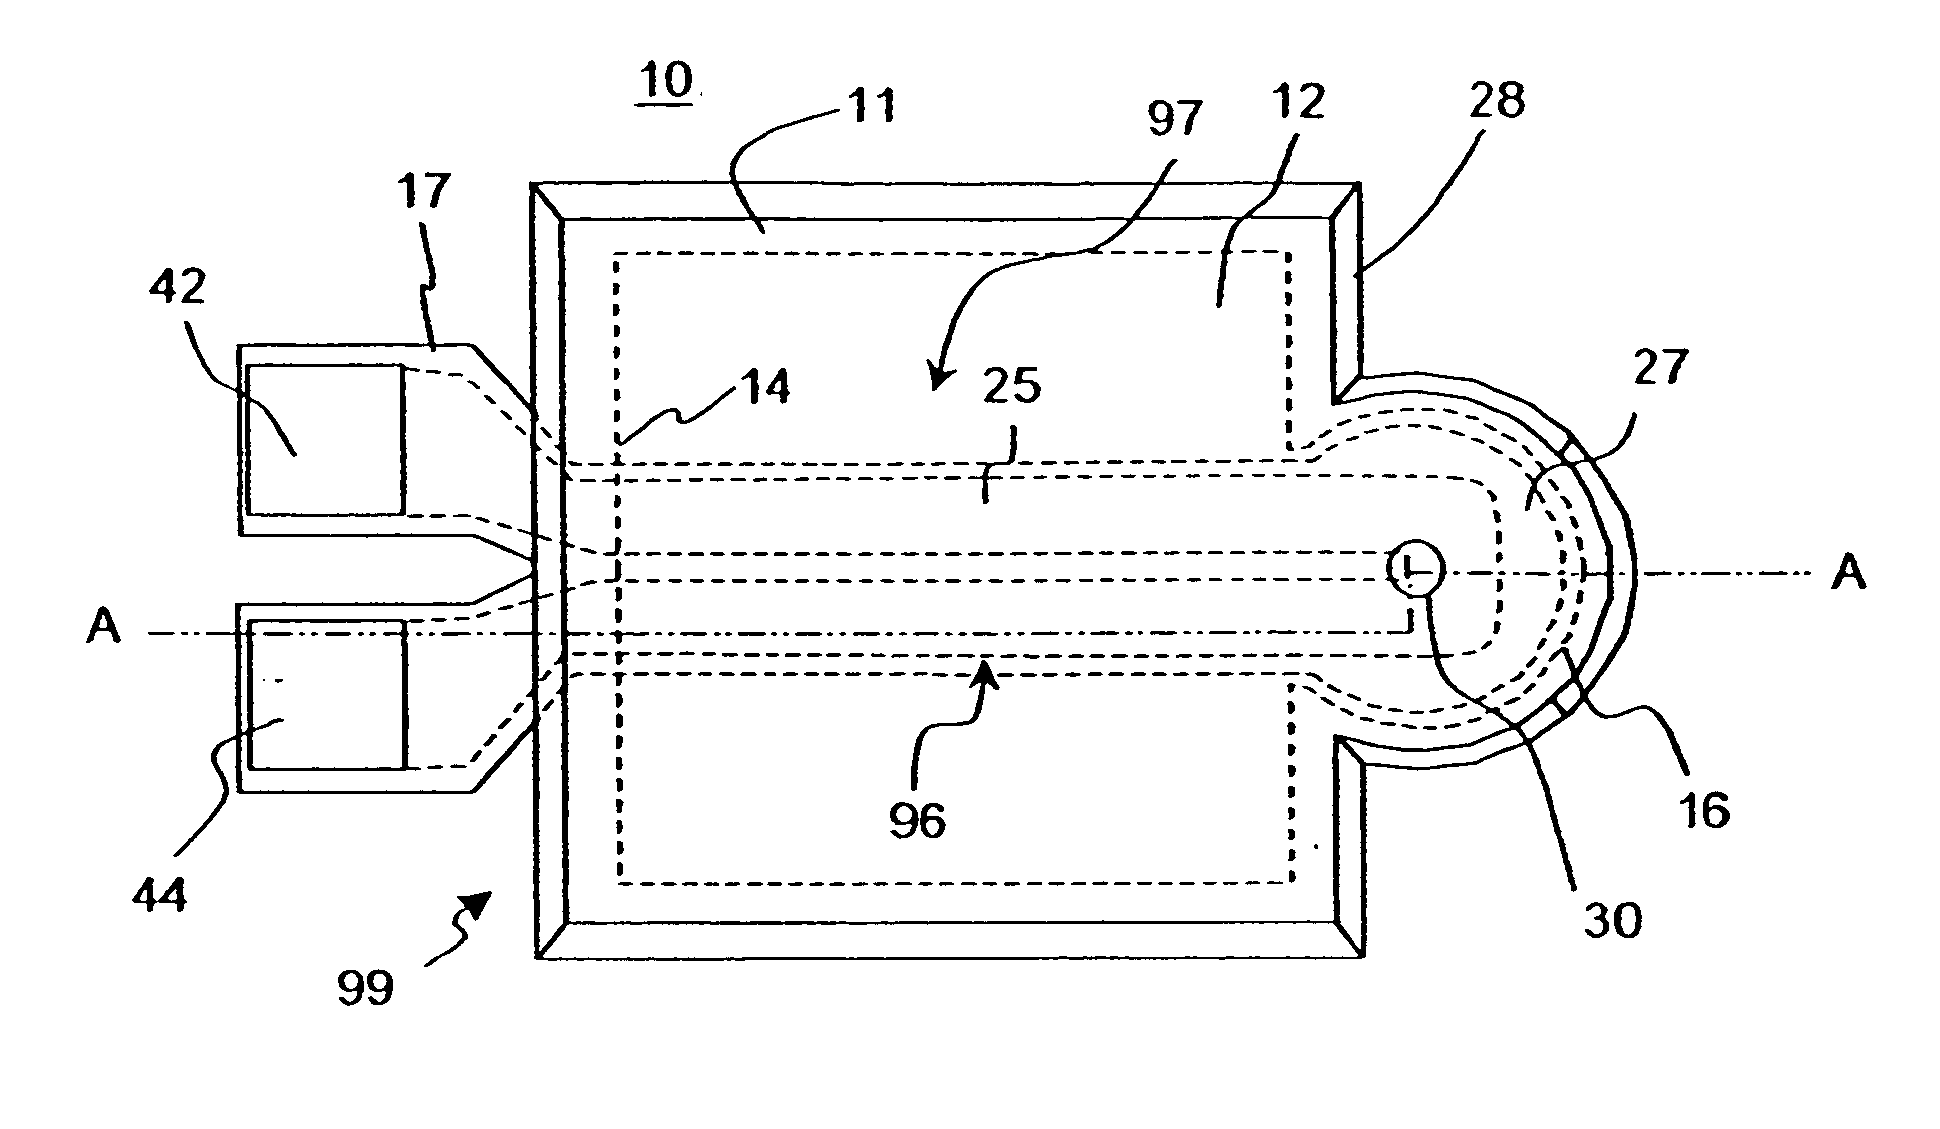 Liquid drop emitter with split thermo-mechanical actuator